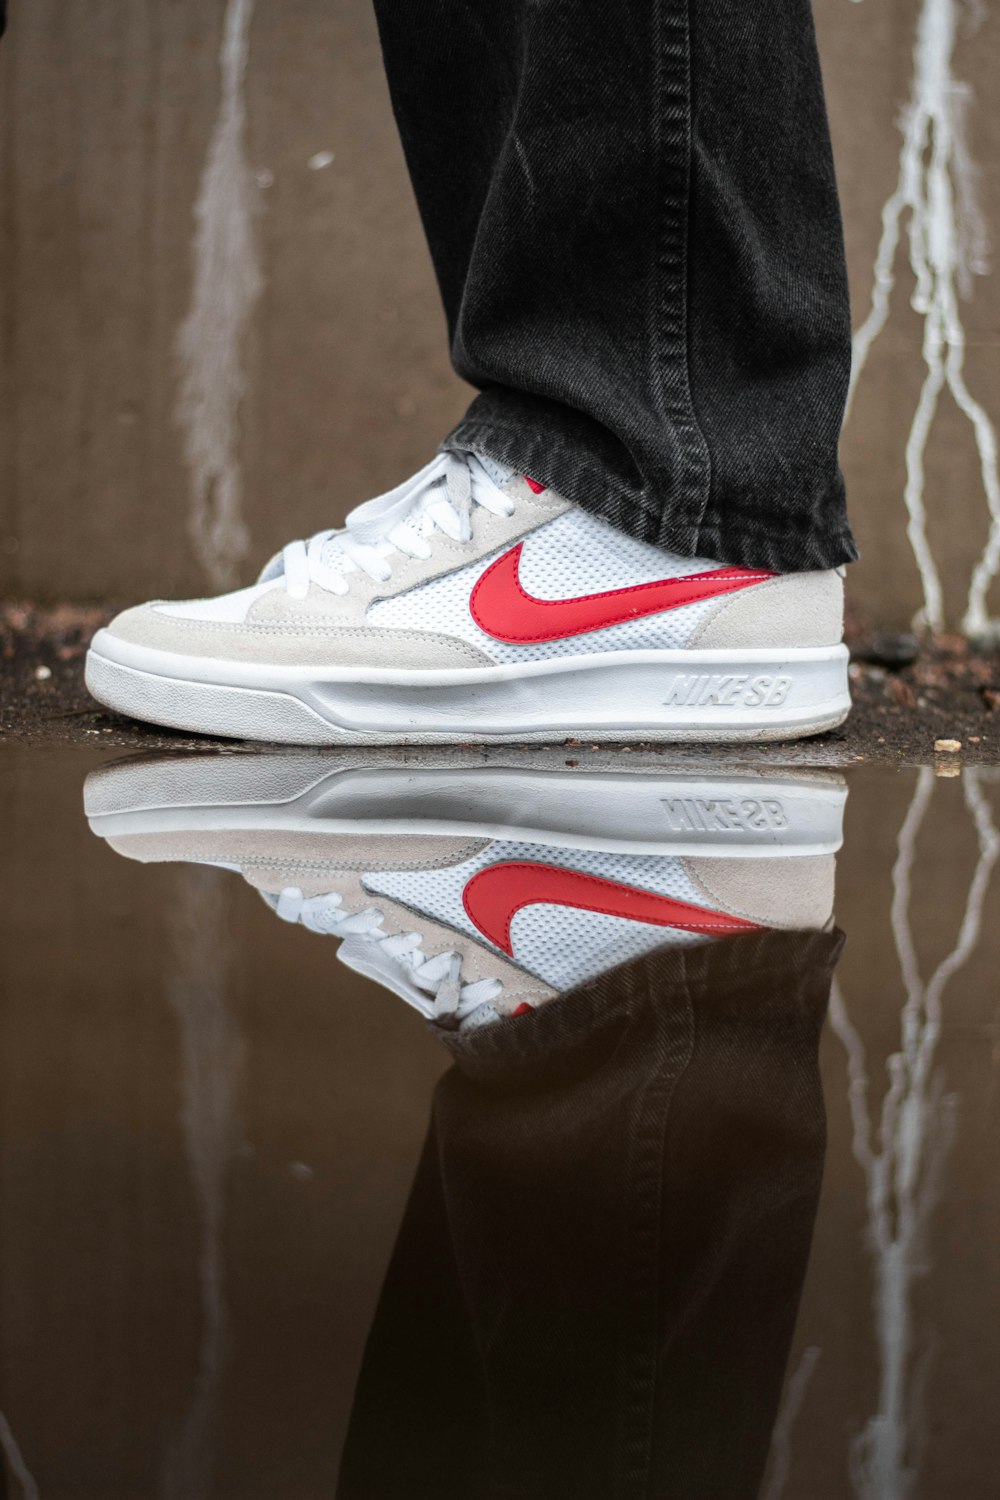 person wearing white and red nike athletic shoes